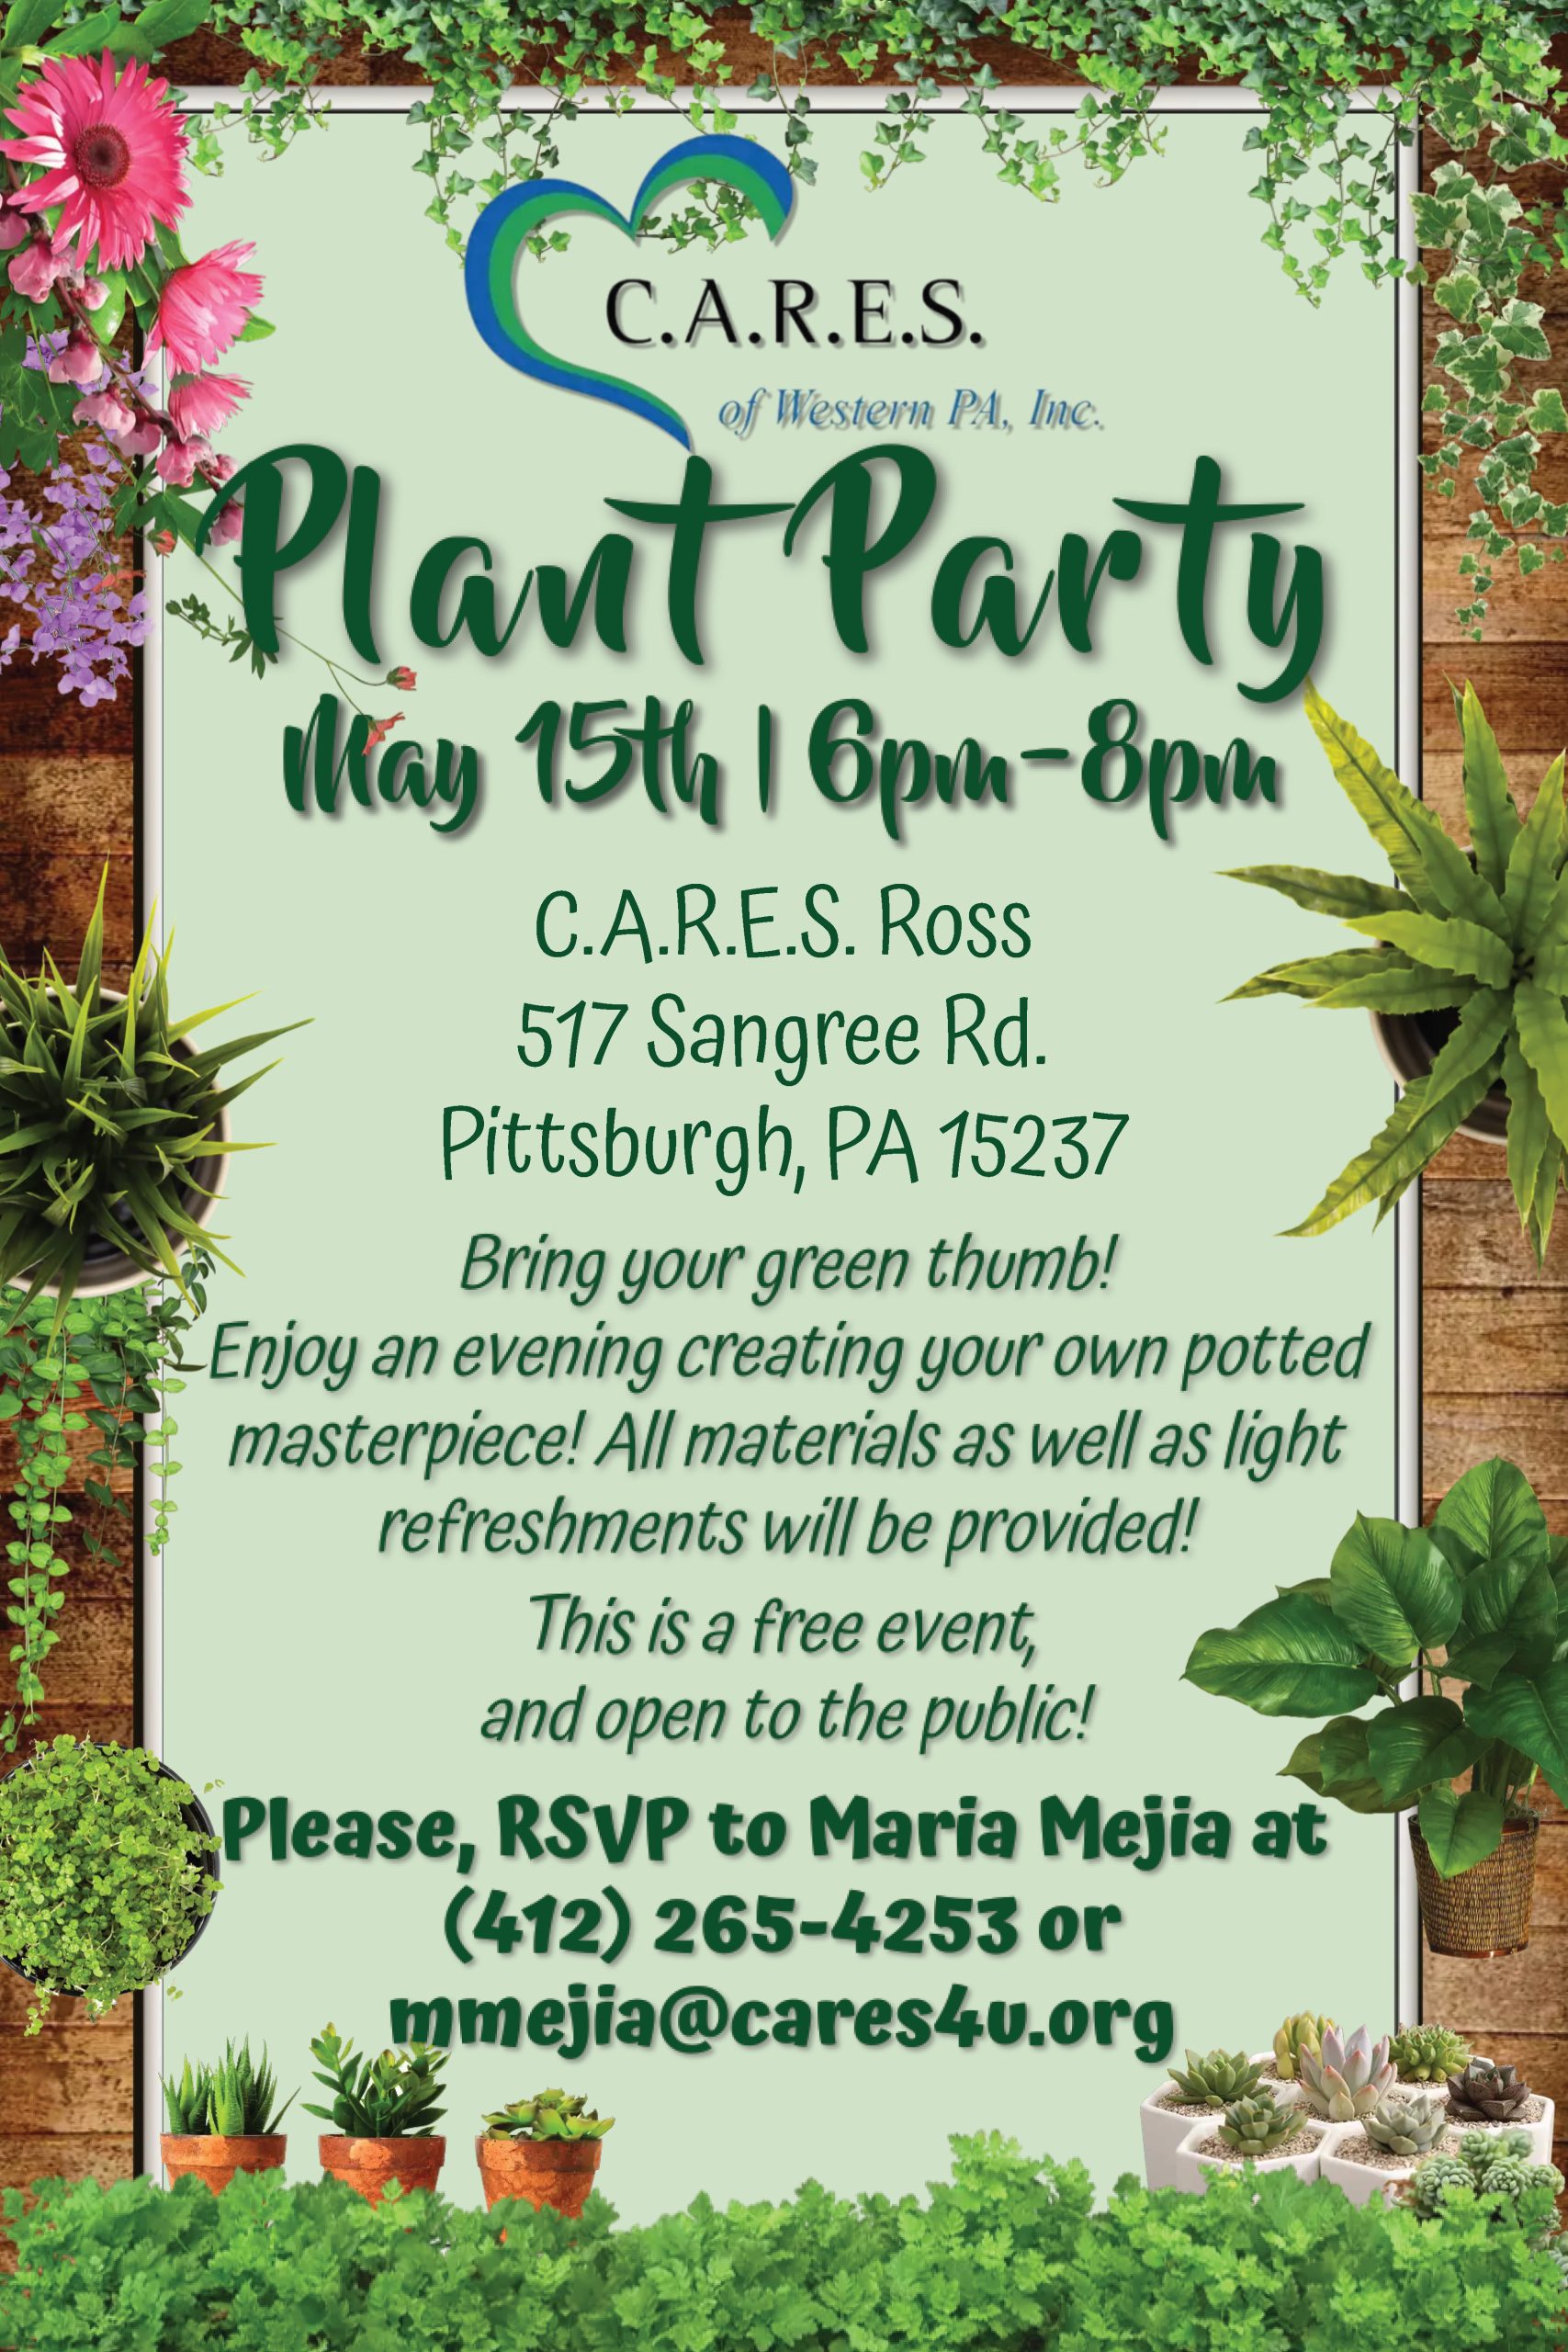 C.A.R.E.S. Plant Party - Pittsburgh 7